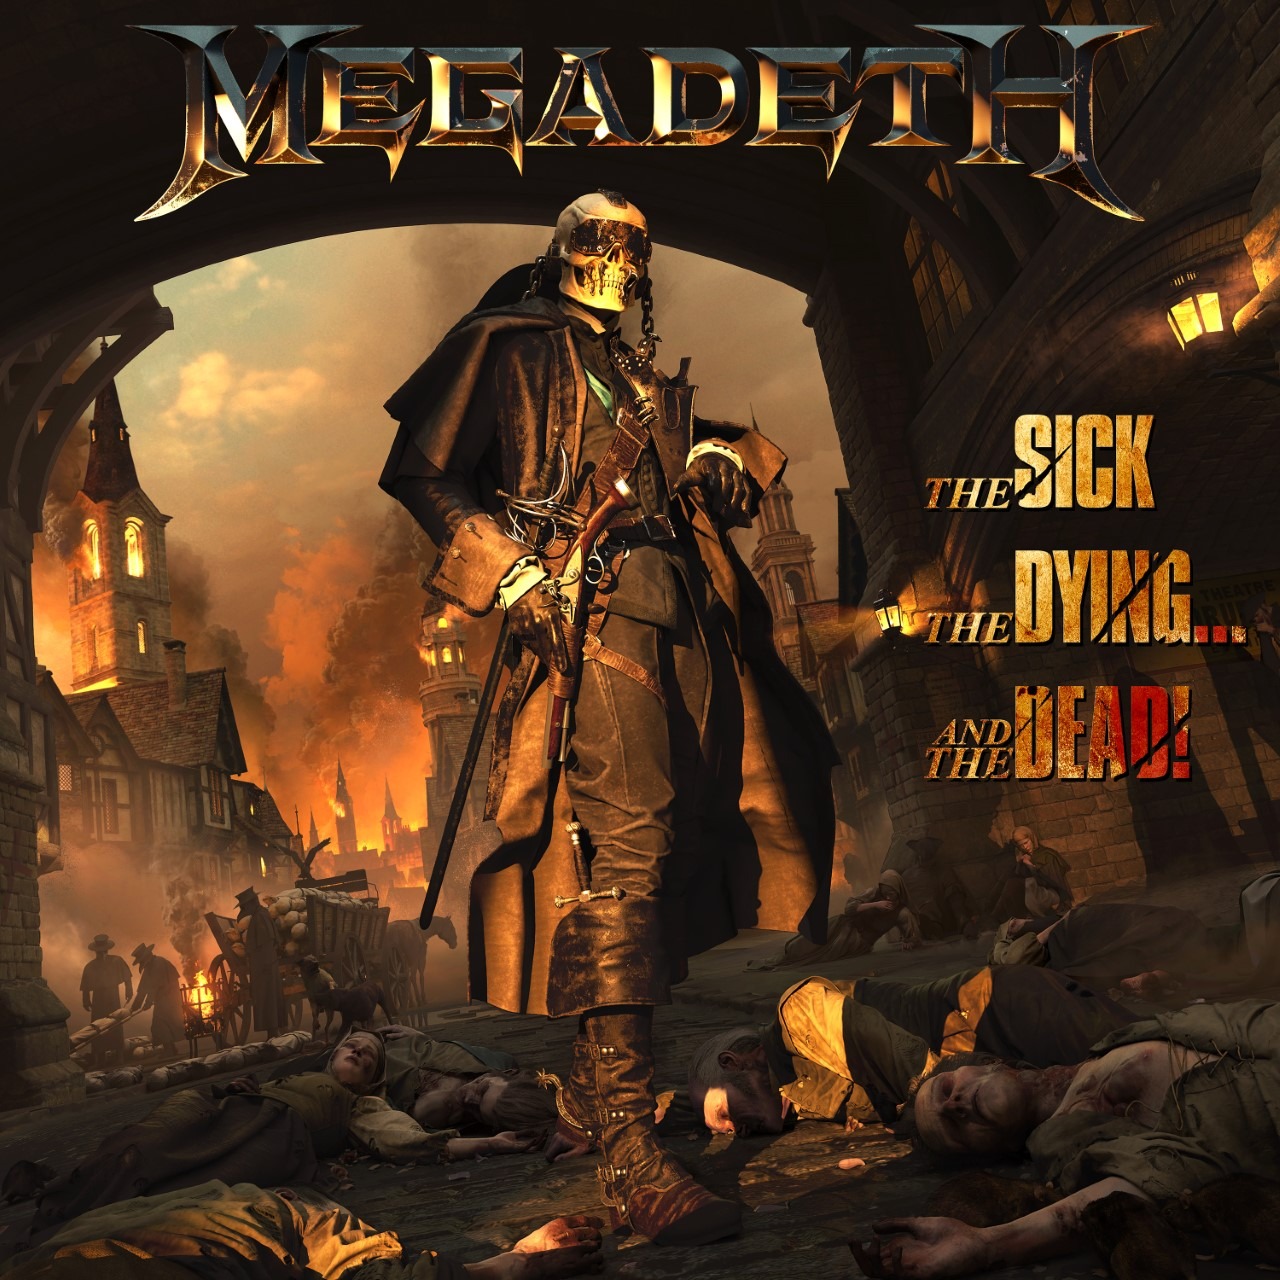 Megadeth (late) returns with a single "We'll be back" And the new album 'The Sick, the Dying ... and the Dead!'